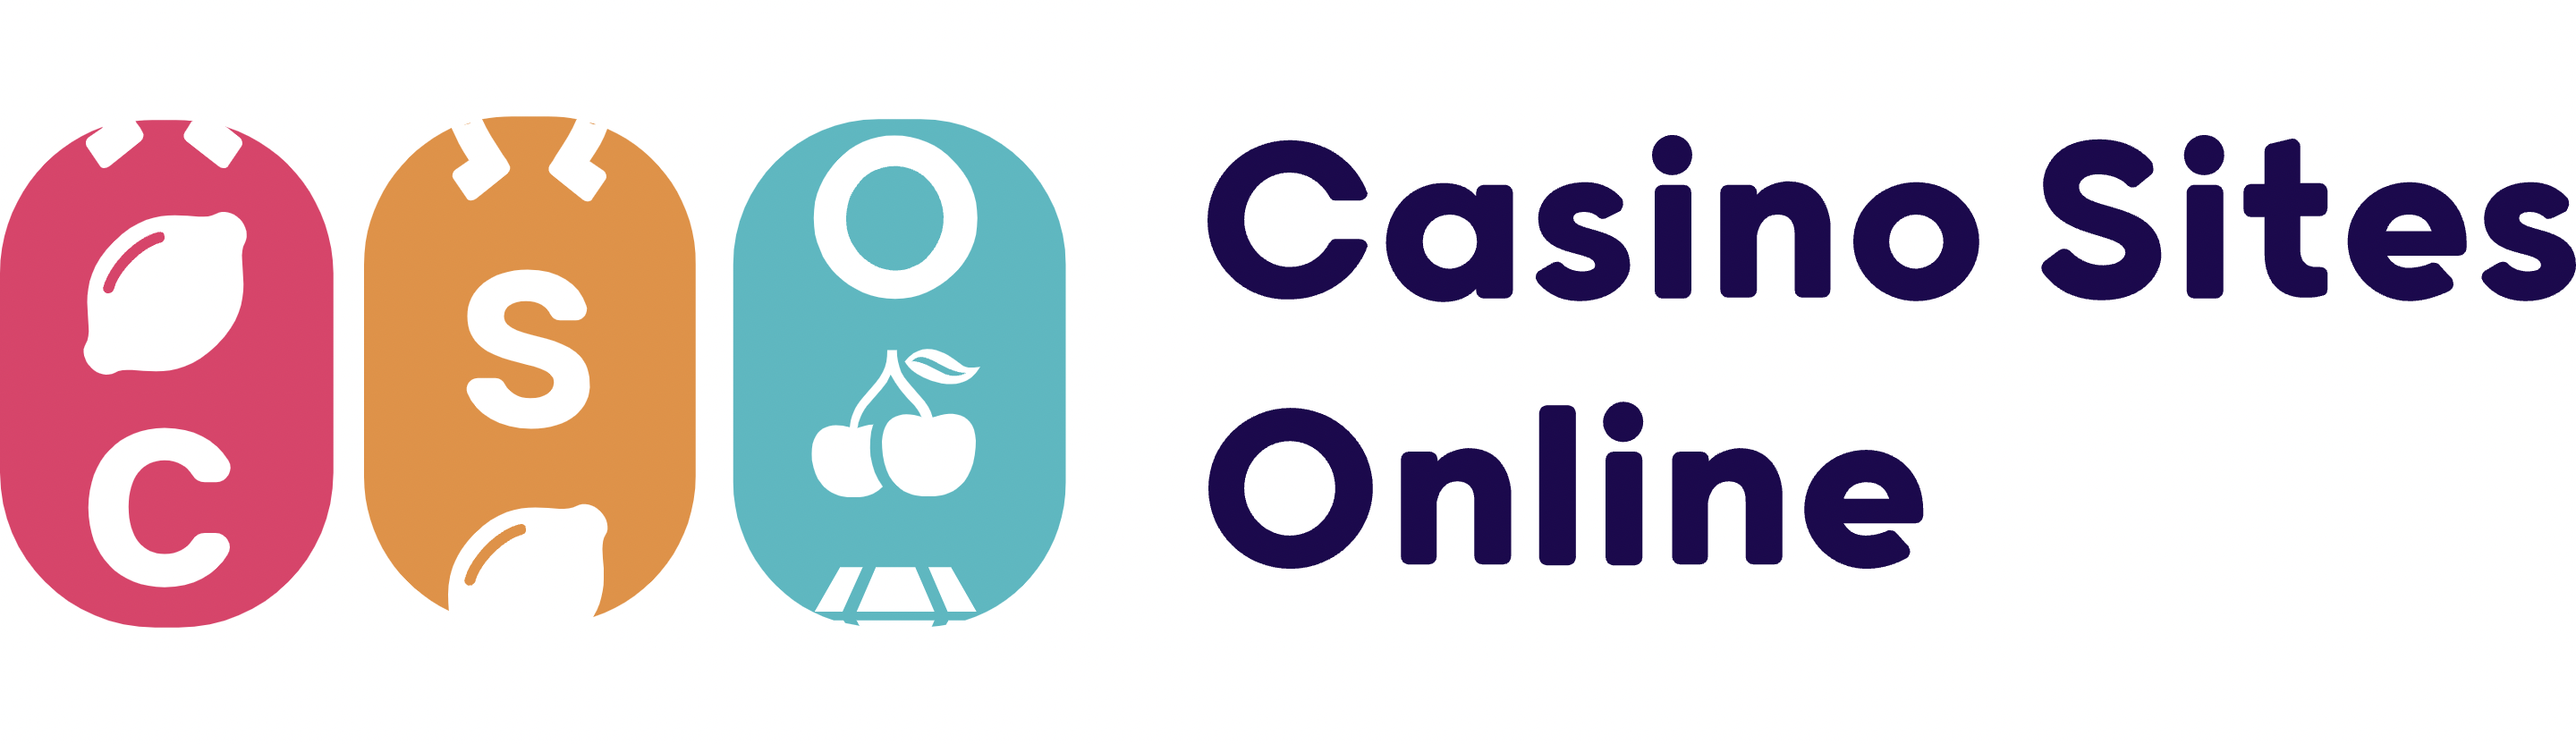 Insightful interactive online casino guide launched by North-East digital startup